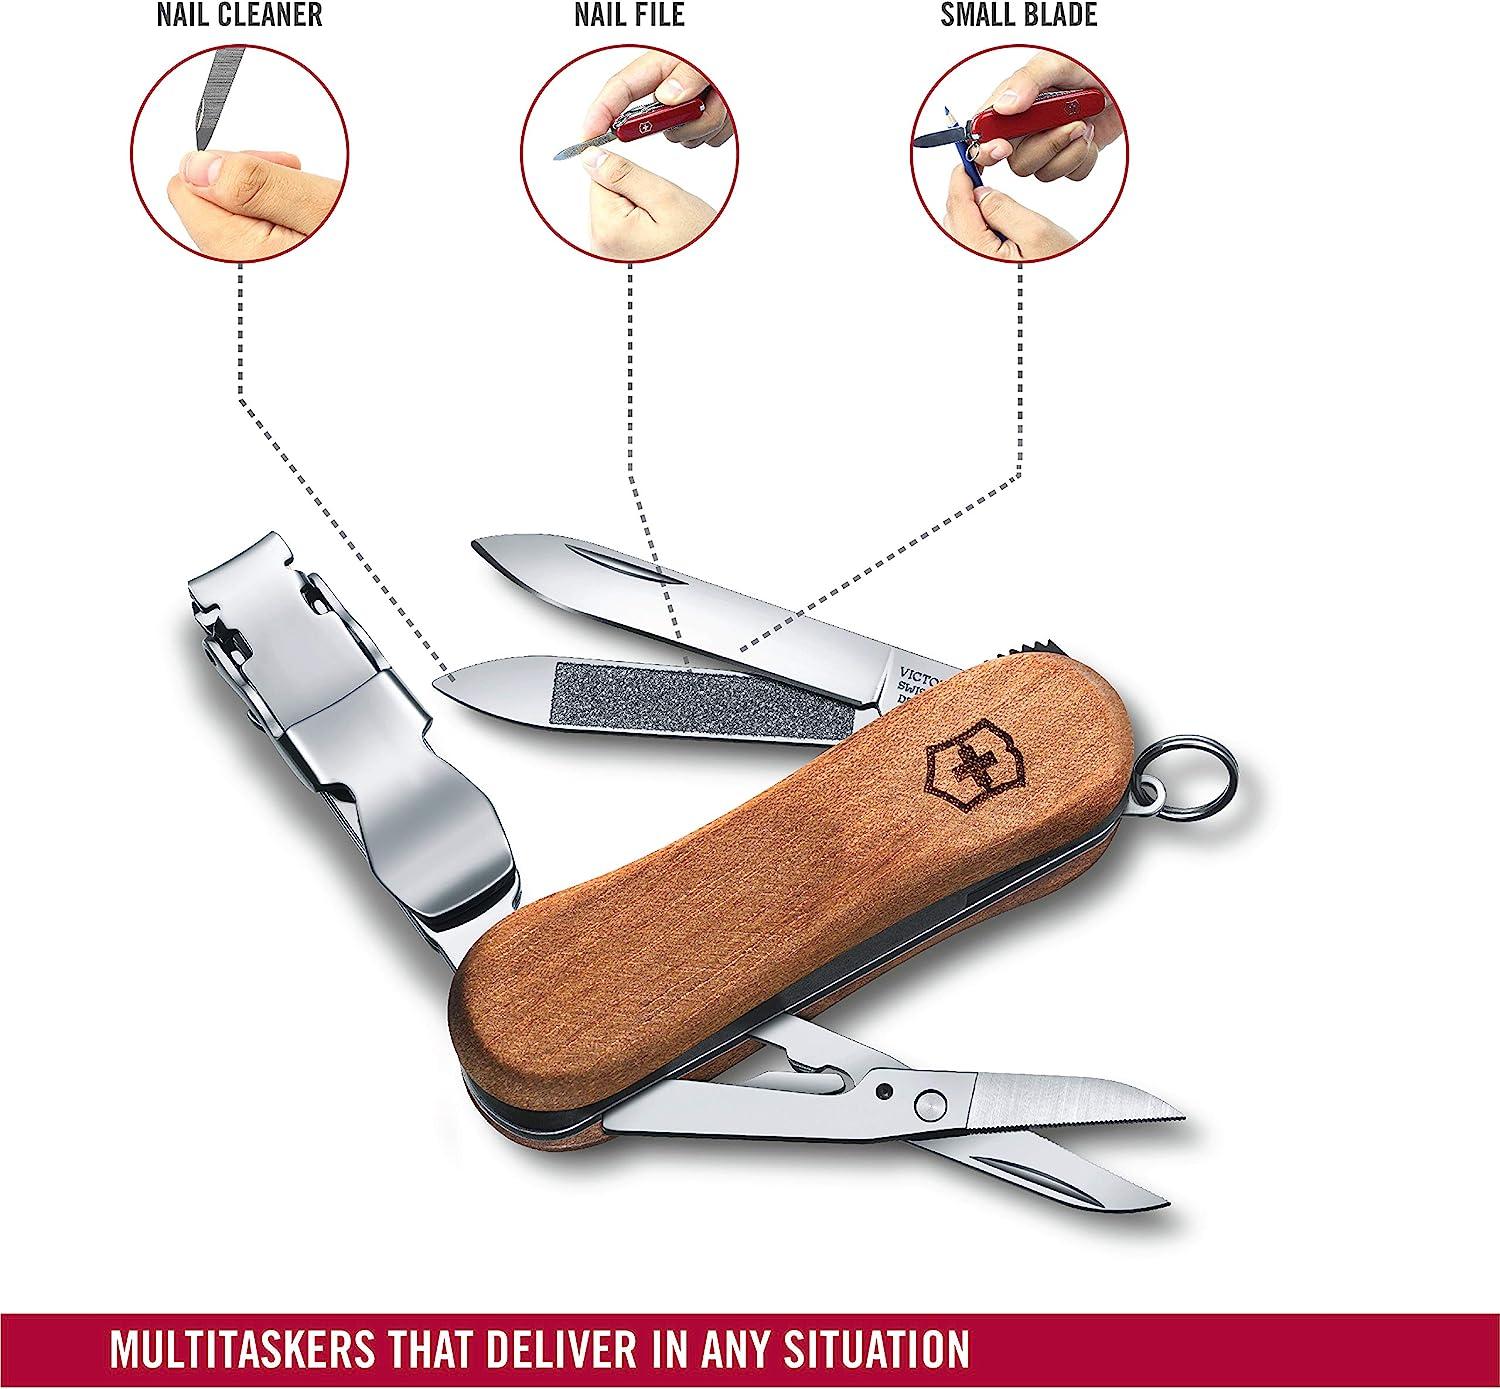 Victorinox Nailclip 580, Swiss Made, 8 Functions, Nail File, Nail Clipper,  Blade, Scissors, Black -